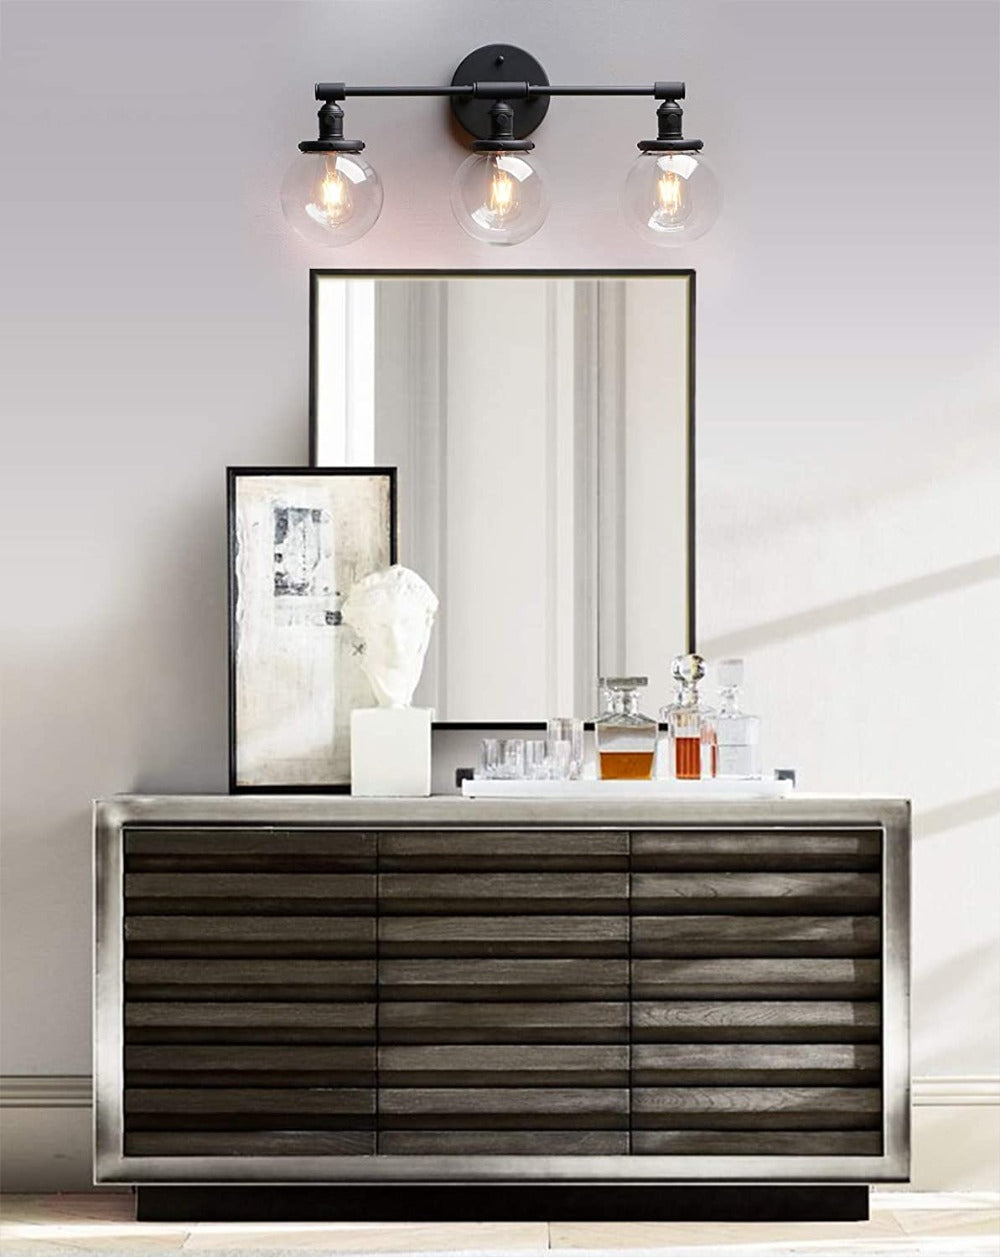 Three Light Bathroom Vanity Lighting with Clear Glass Globes and matte black hardware shown above a bathroom vanity